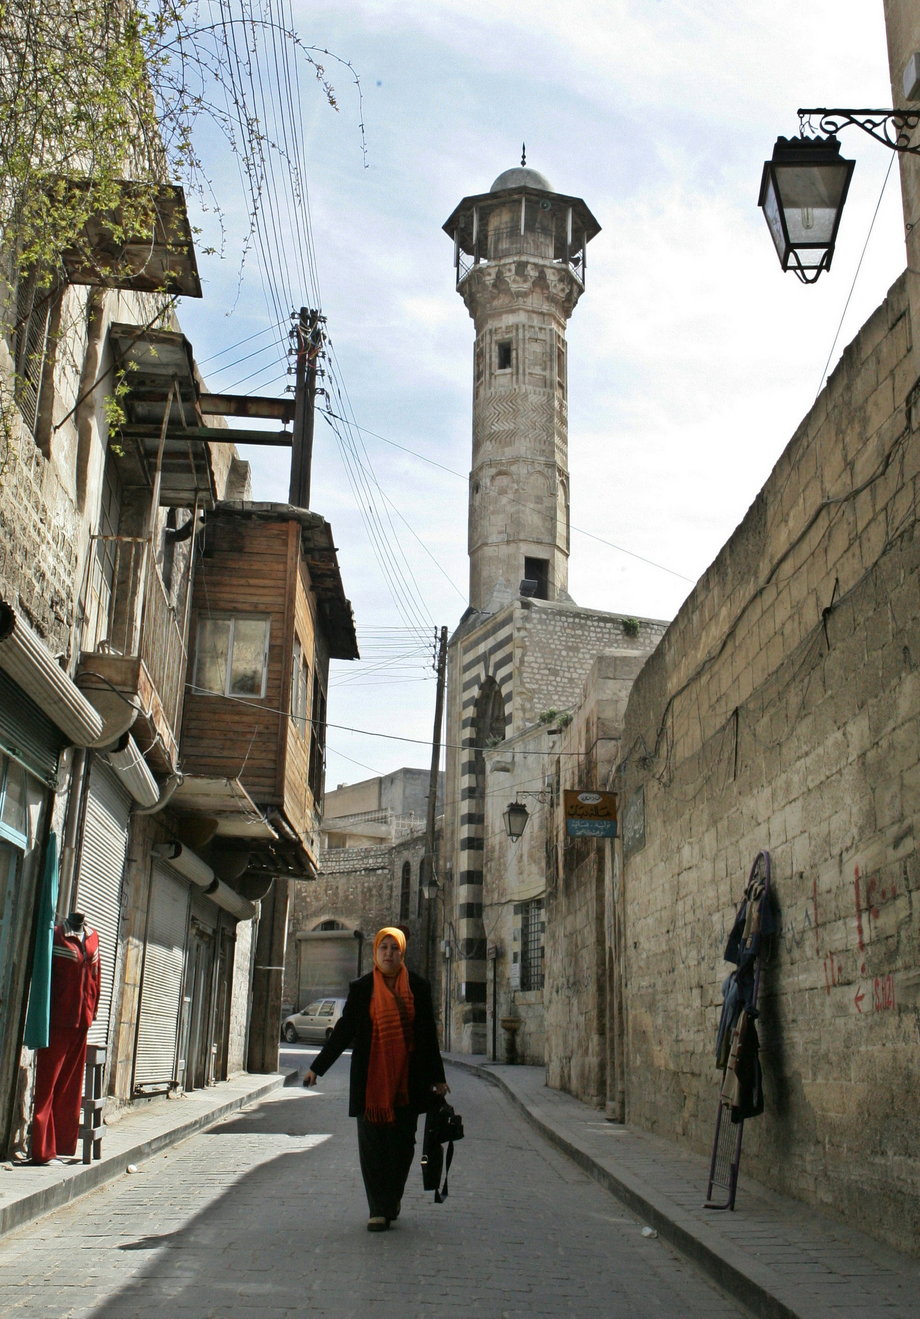 In 2004, Aleppo was chosen by the Islamic conference organization to become the capital of Arab-Islamic culture.